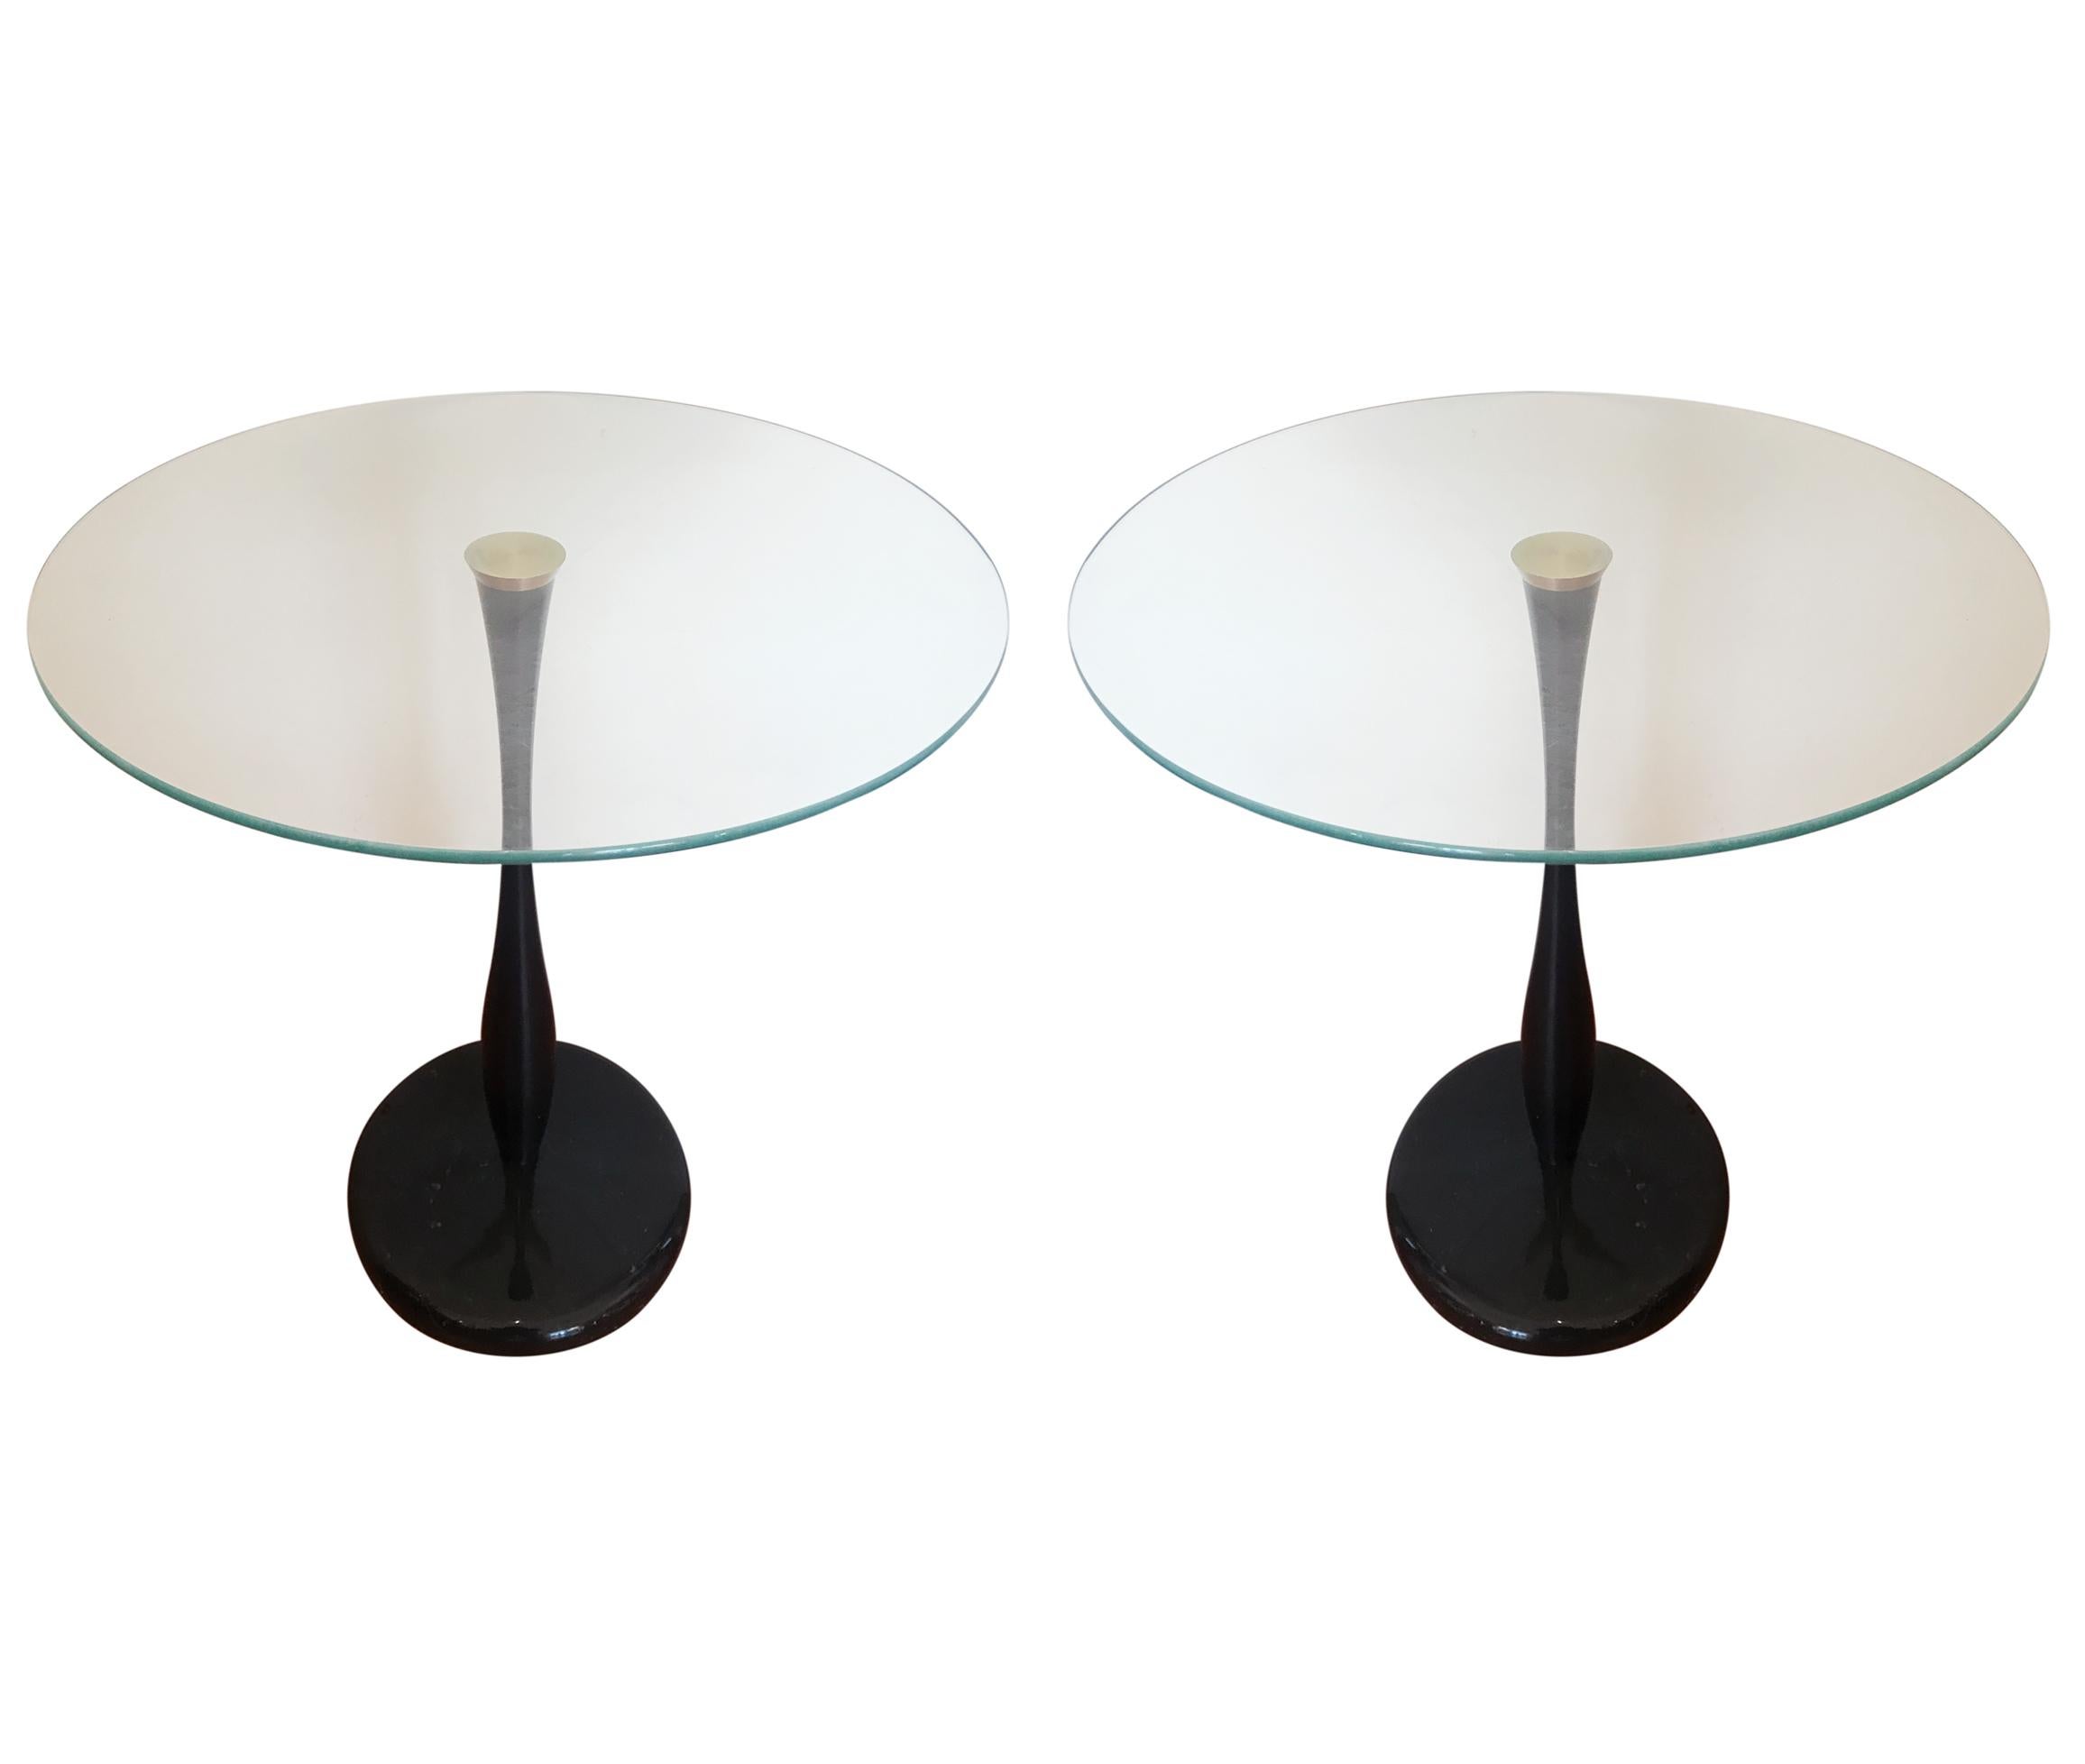 American Pair of Mid-Century Modern Marble and Glass End / Side Tables by Kaiser Newman For Sale